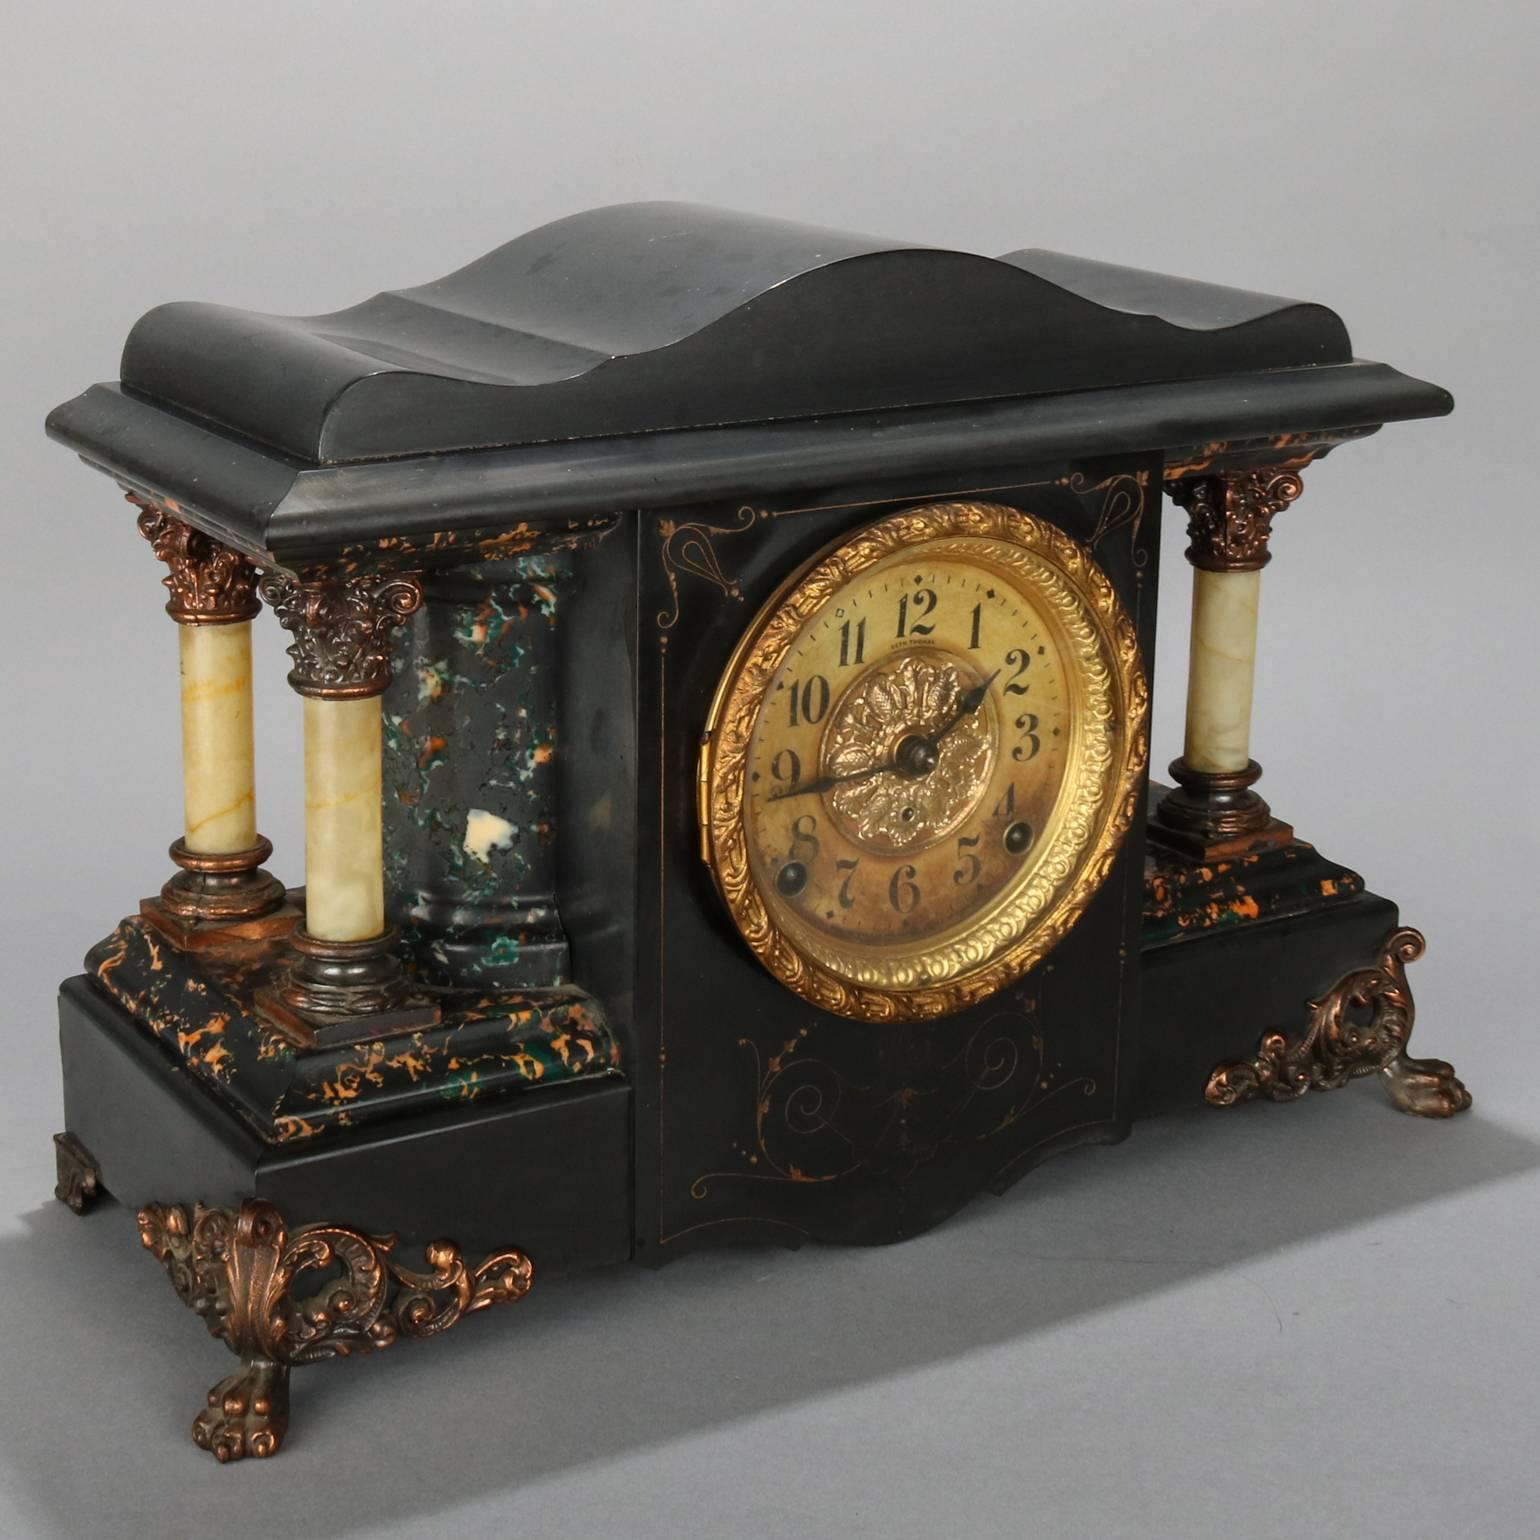 Antique Seth Thomas mantel clock features incised gilt decorated Adamantine case, flanked by faux marble demilune and full columns with cast bronze bases, capitals and feet, circa 1900

Measures: 12